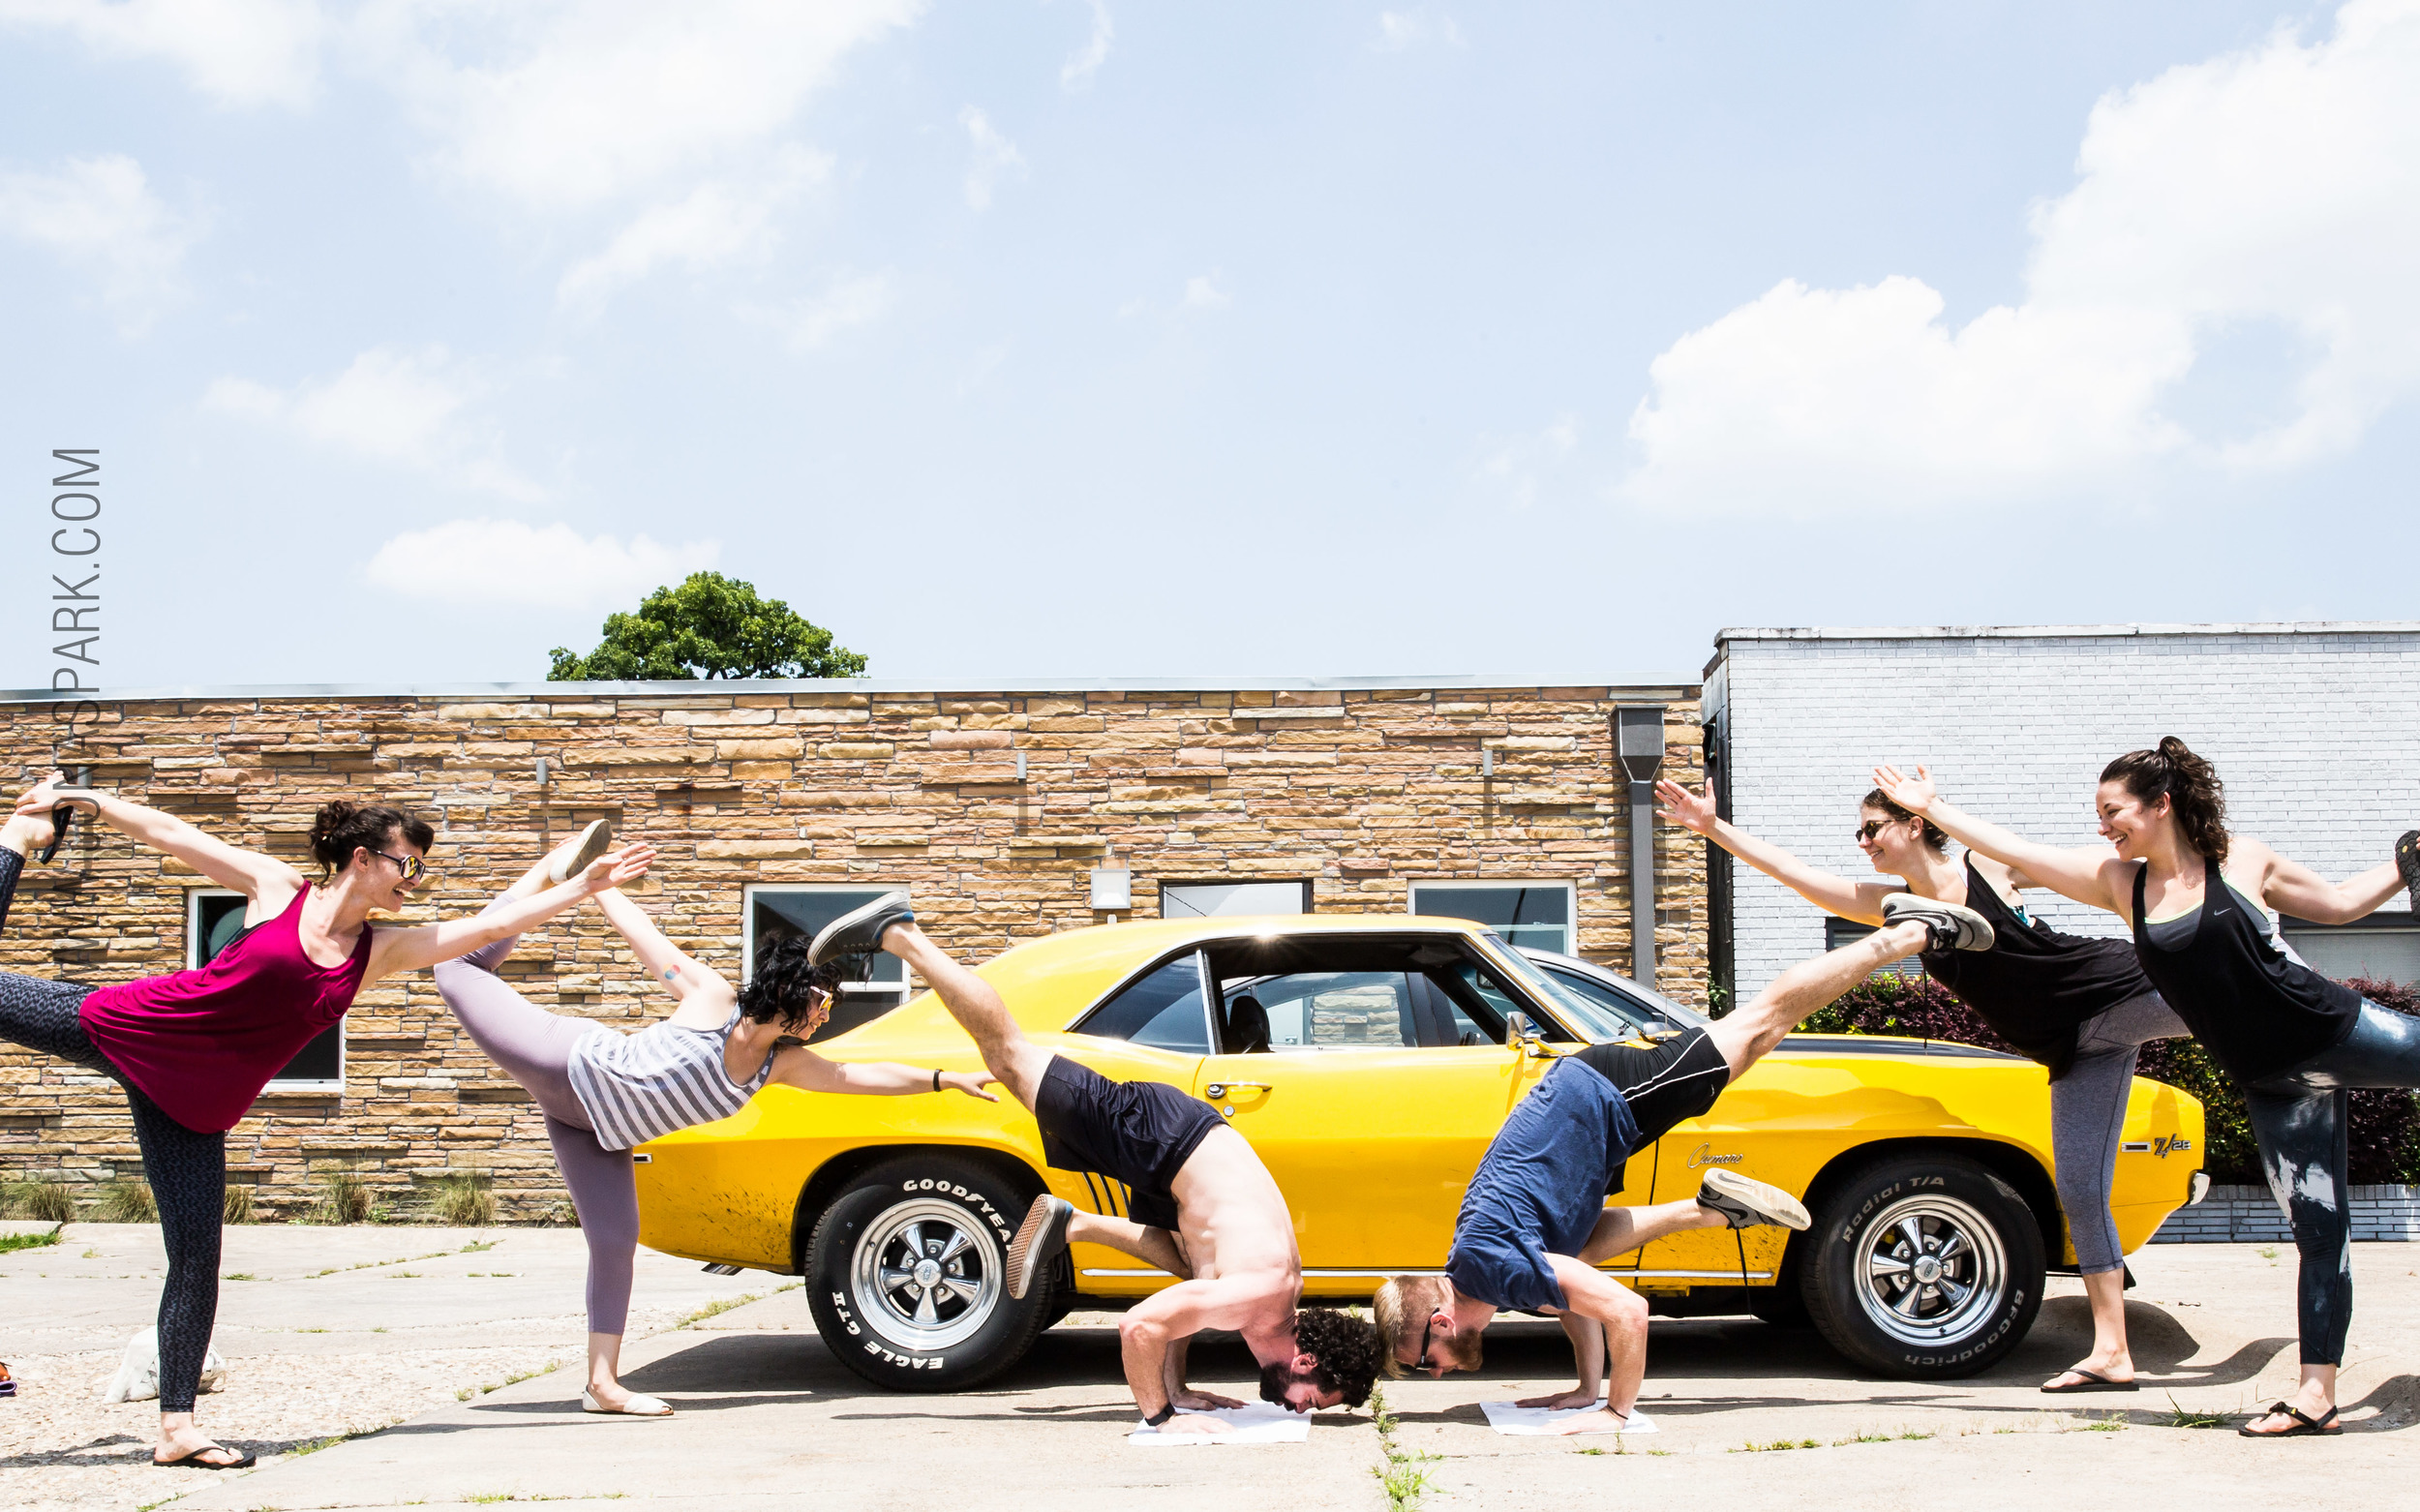 Todd, Muscle Car and Yoga